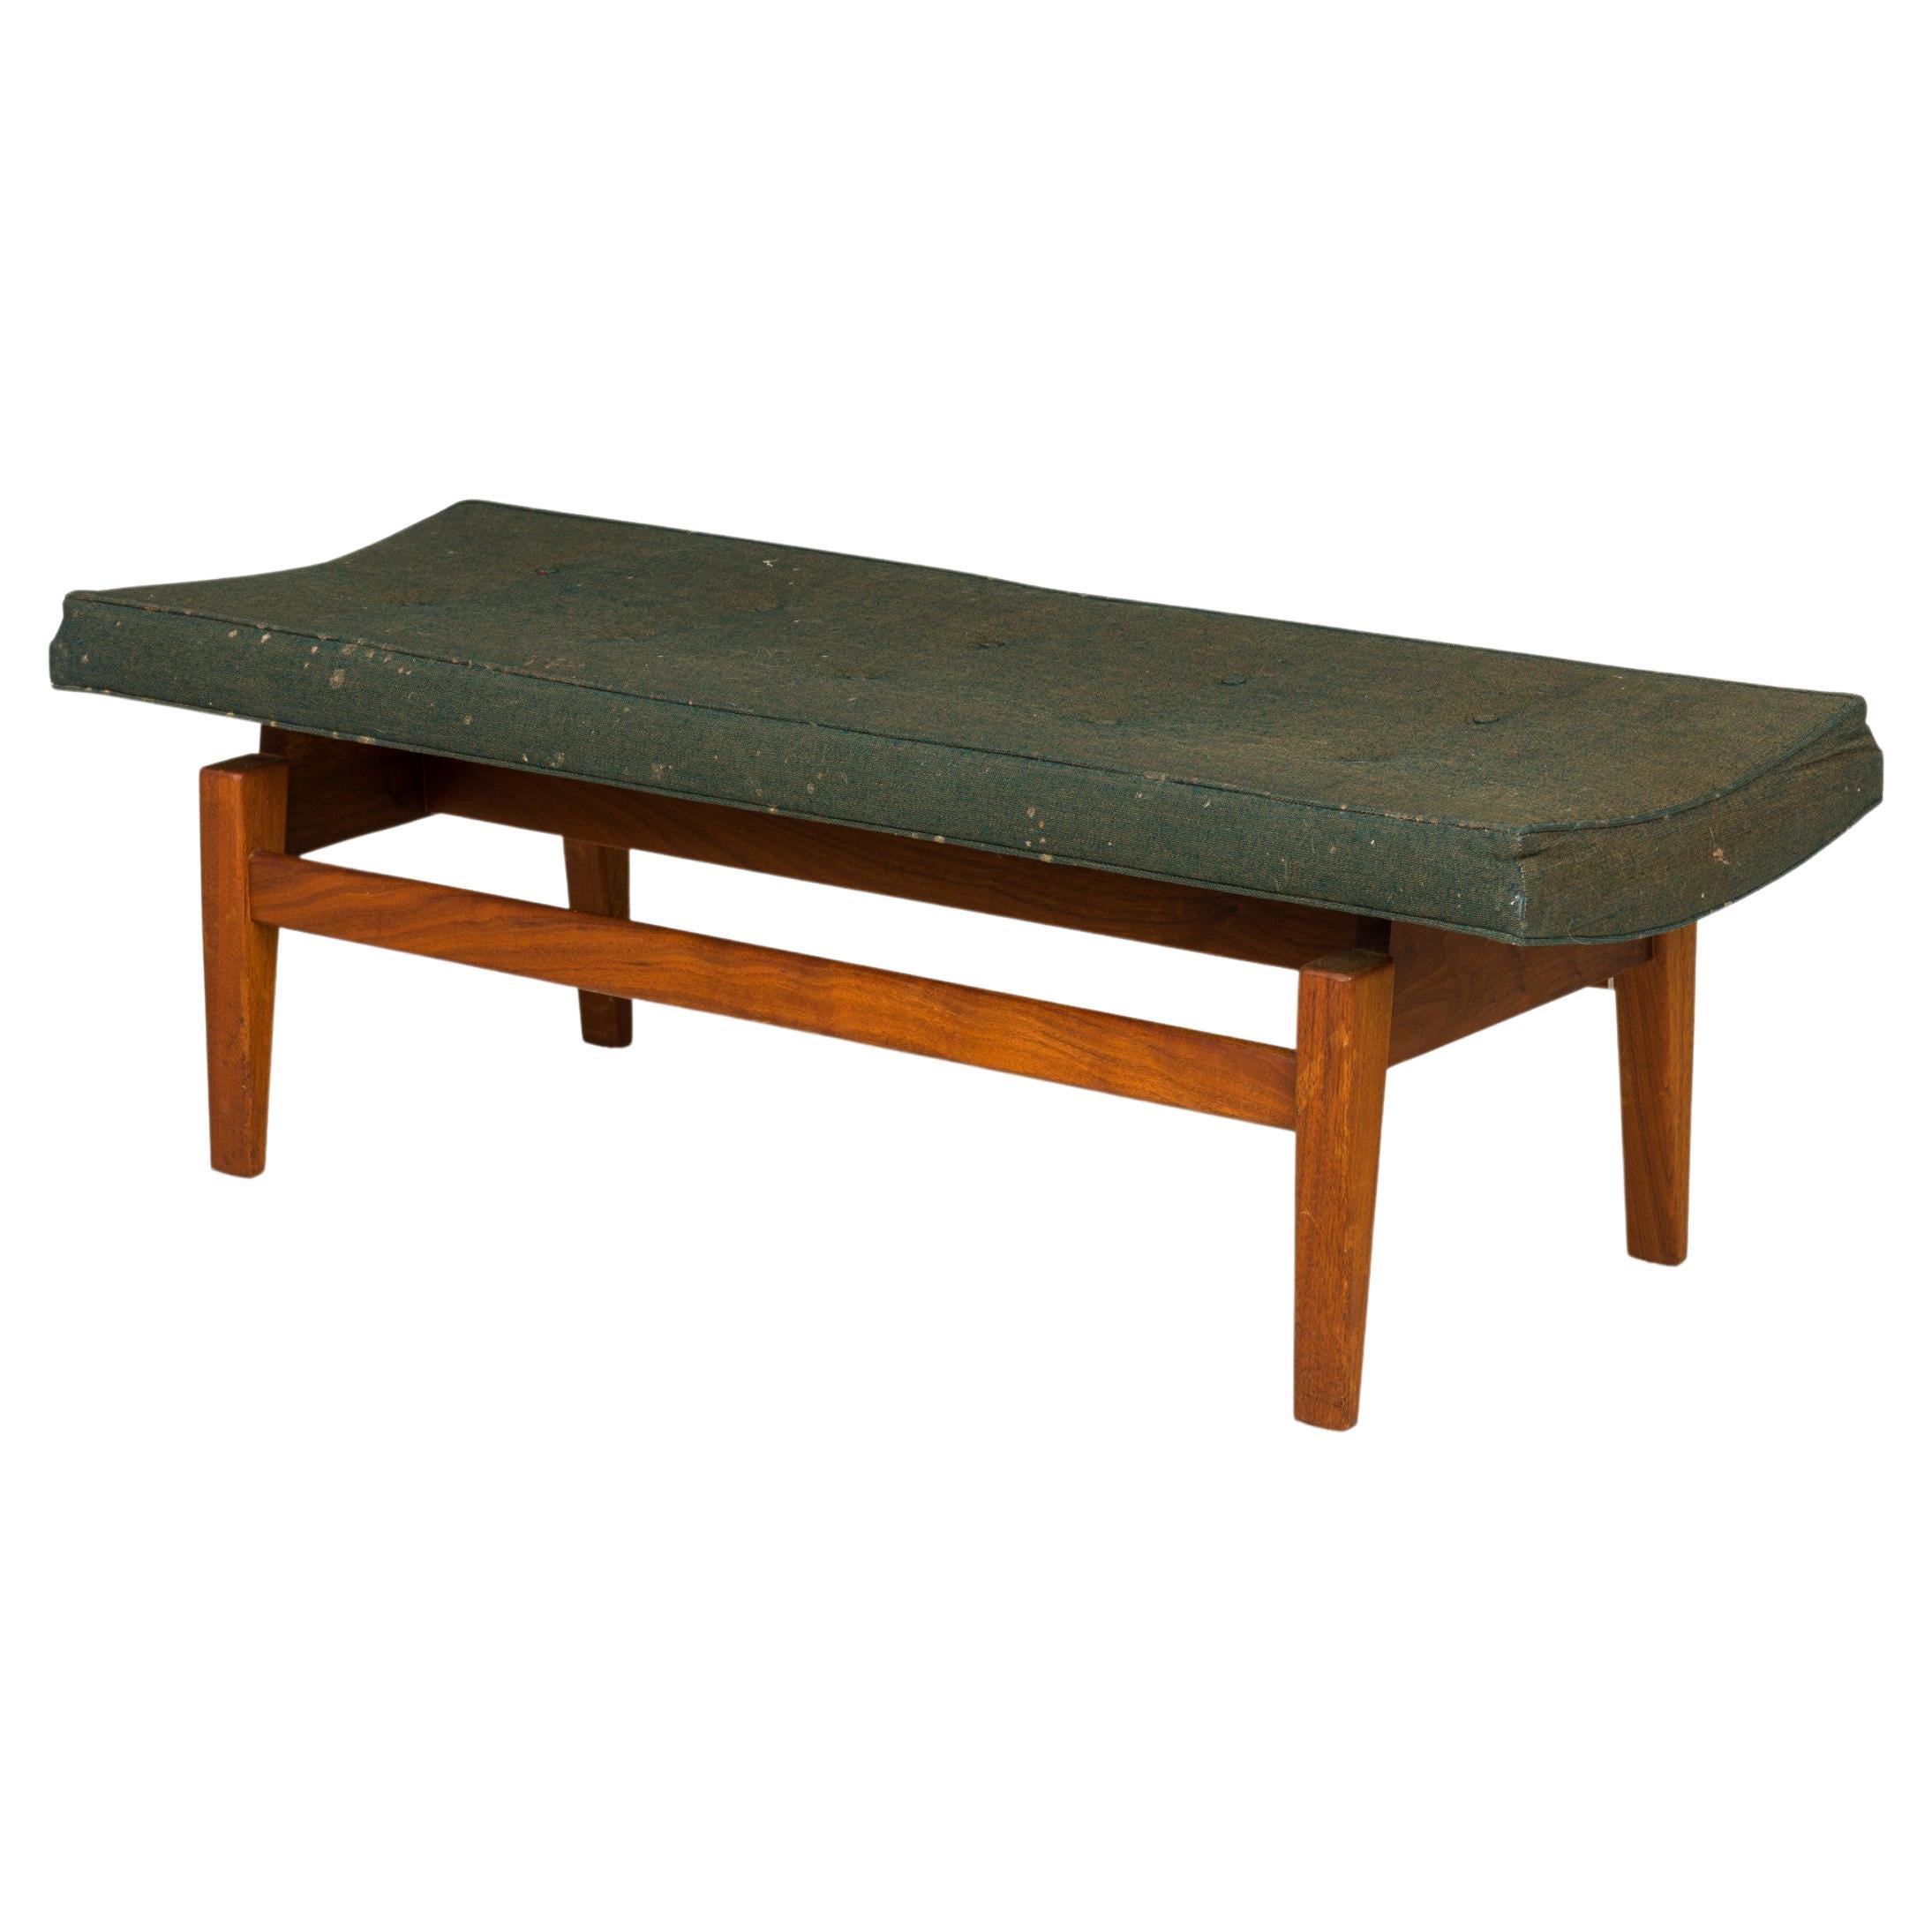 Jens Risom Danish Army Green Fabric Upholstery and Wood Floating Bench For Sale